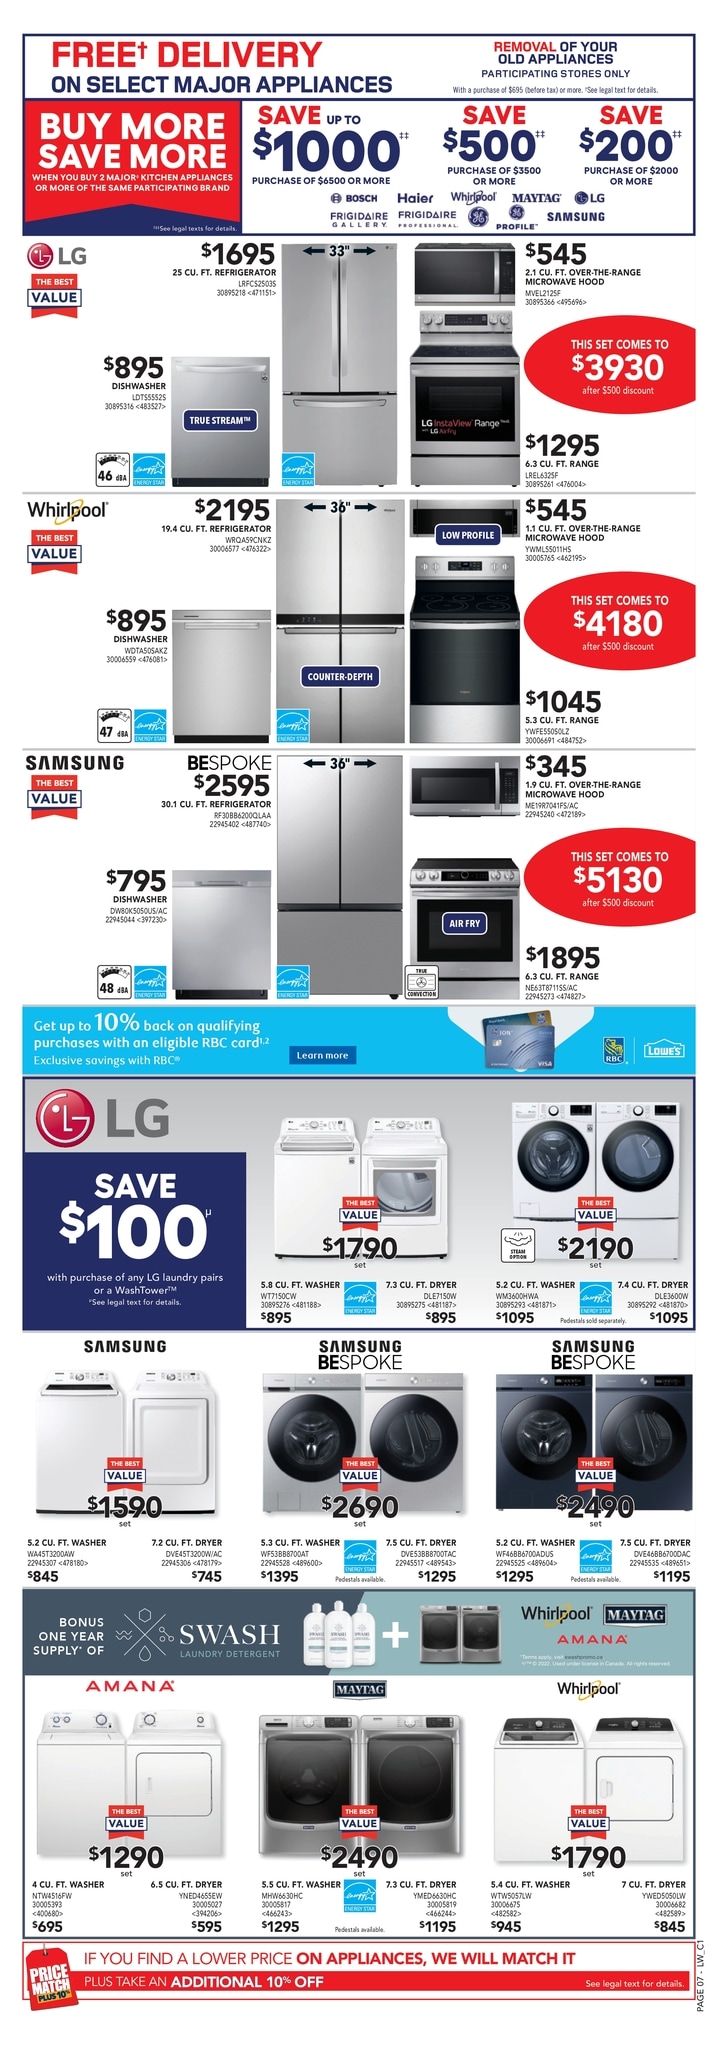 Lowe's - Weekly Flyer Specials - Page 7